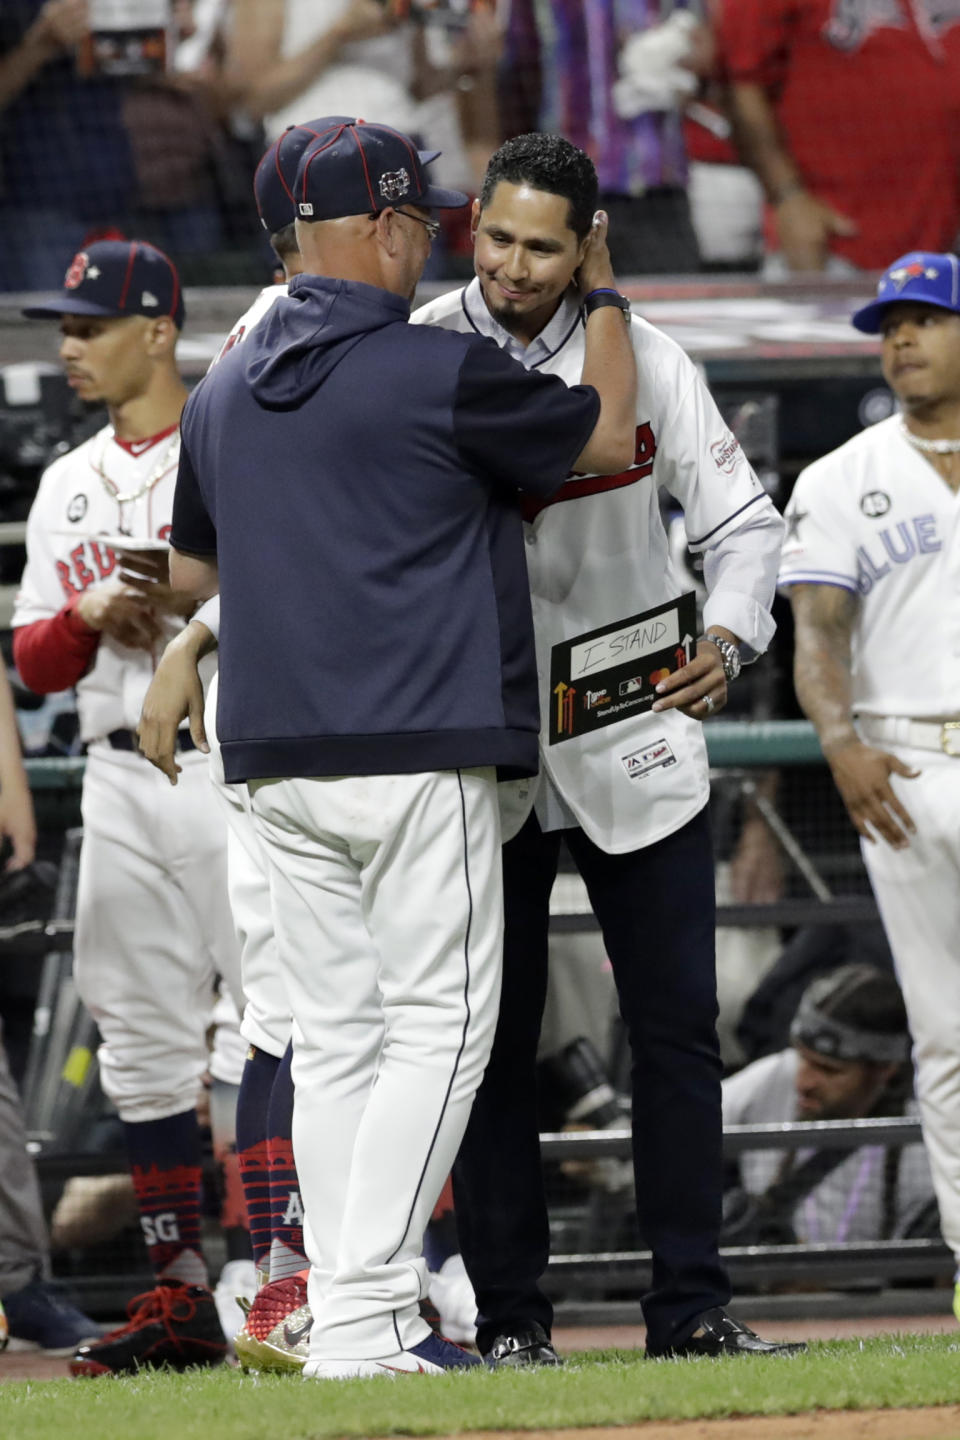 Cleveland Indians manager Terry Francona, left, hugs Indians pitcher Carlos Carrasco during the middle of the fifth inning of the MLB baseball All-Star Game, Tuesday, July 9, 2019, in Cleveland. The Indians' right-hander, who was recently diagnosed with a form of leukemia, was saluted in the fifth inning of the game as part of Major League Baseball's "Stand Up to Cancer" campaign. (AP Photo/Tony Dejak)